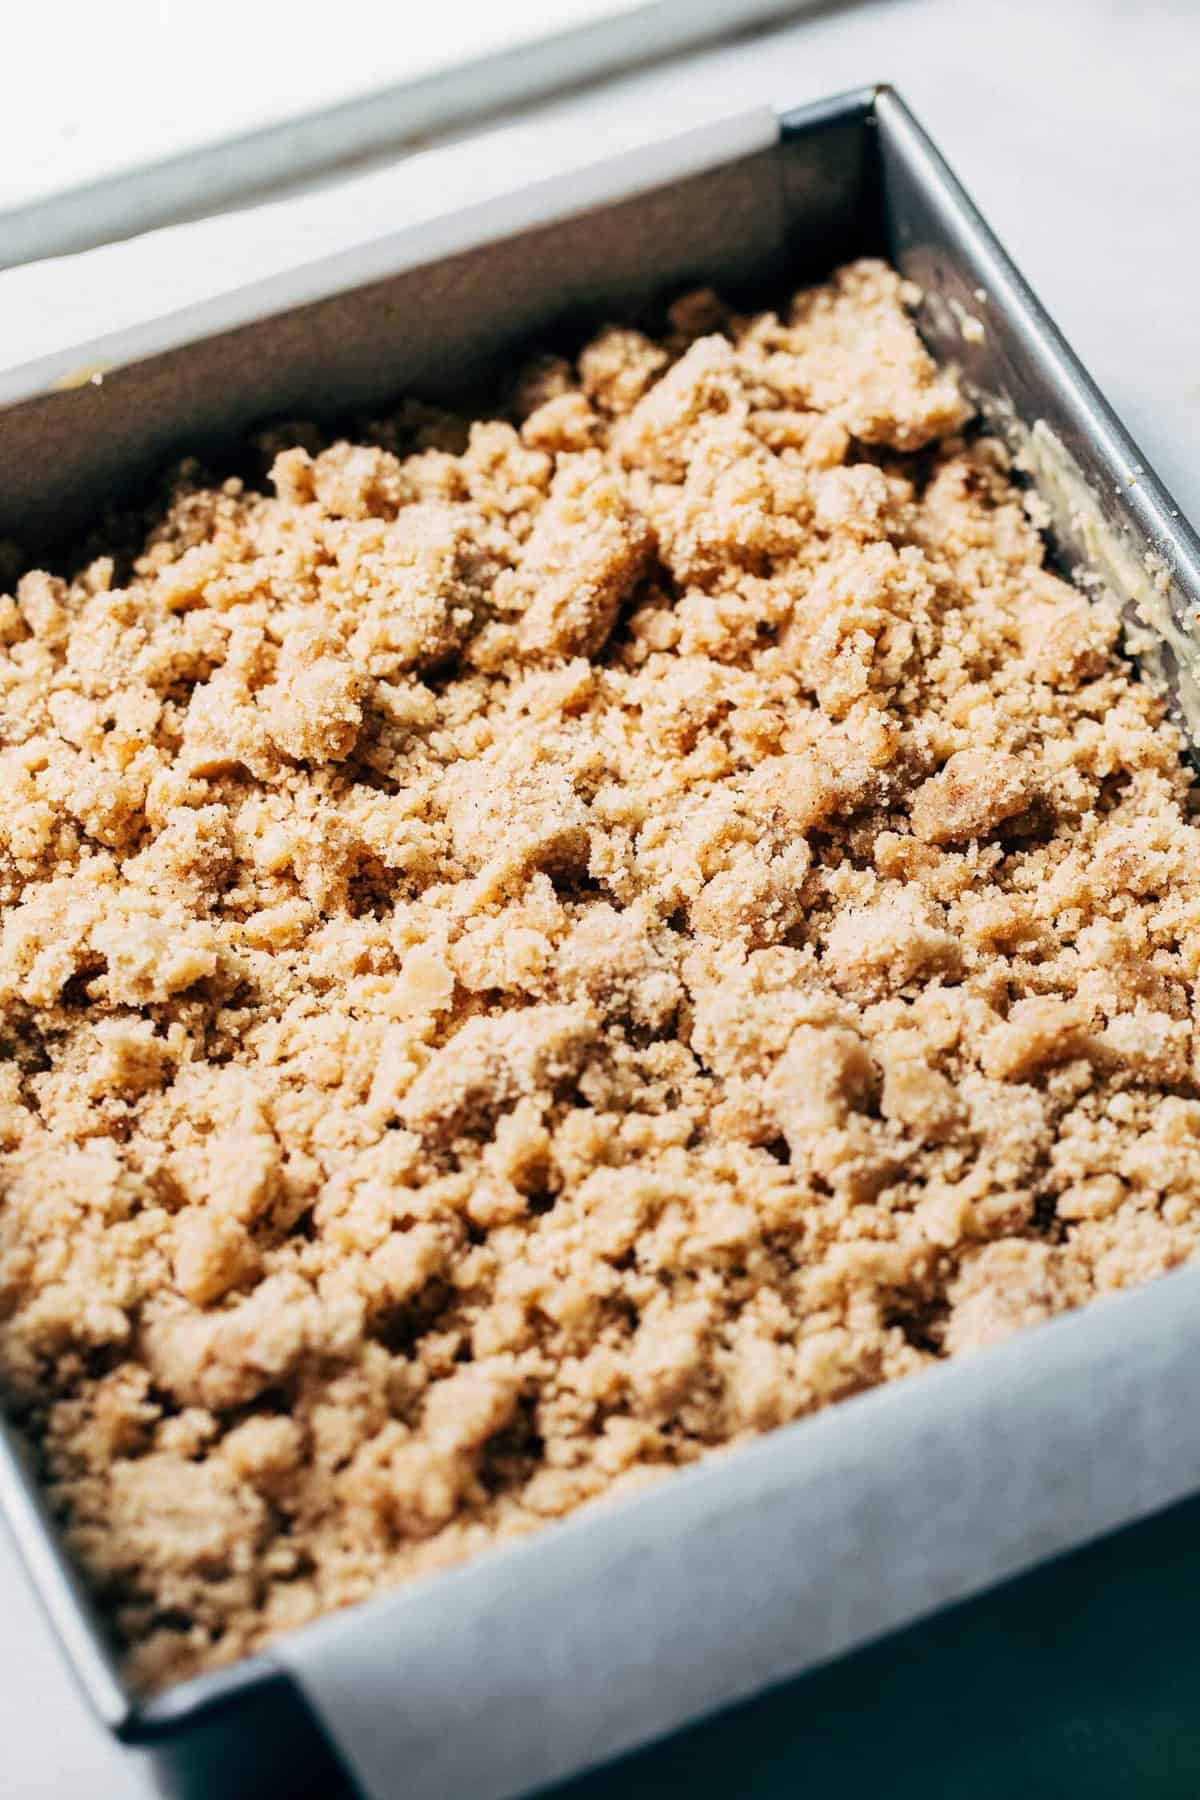 banana cake covered in a crumble topping before baking